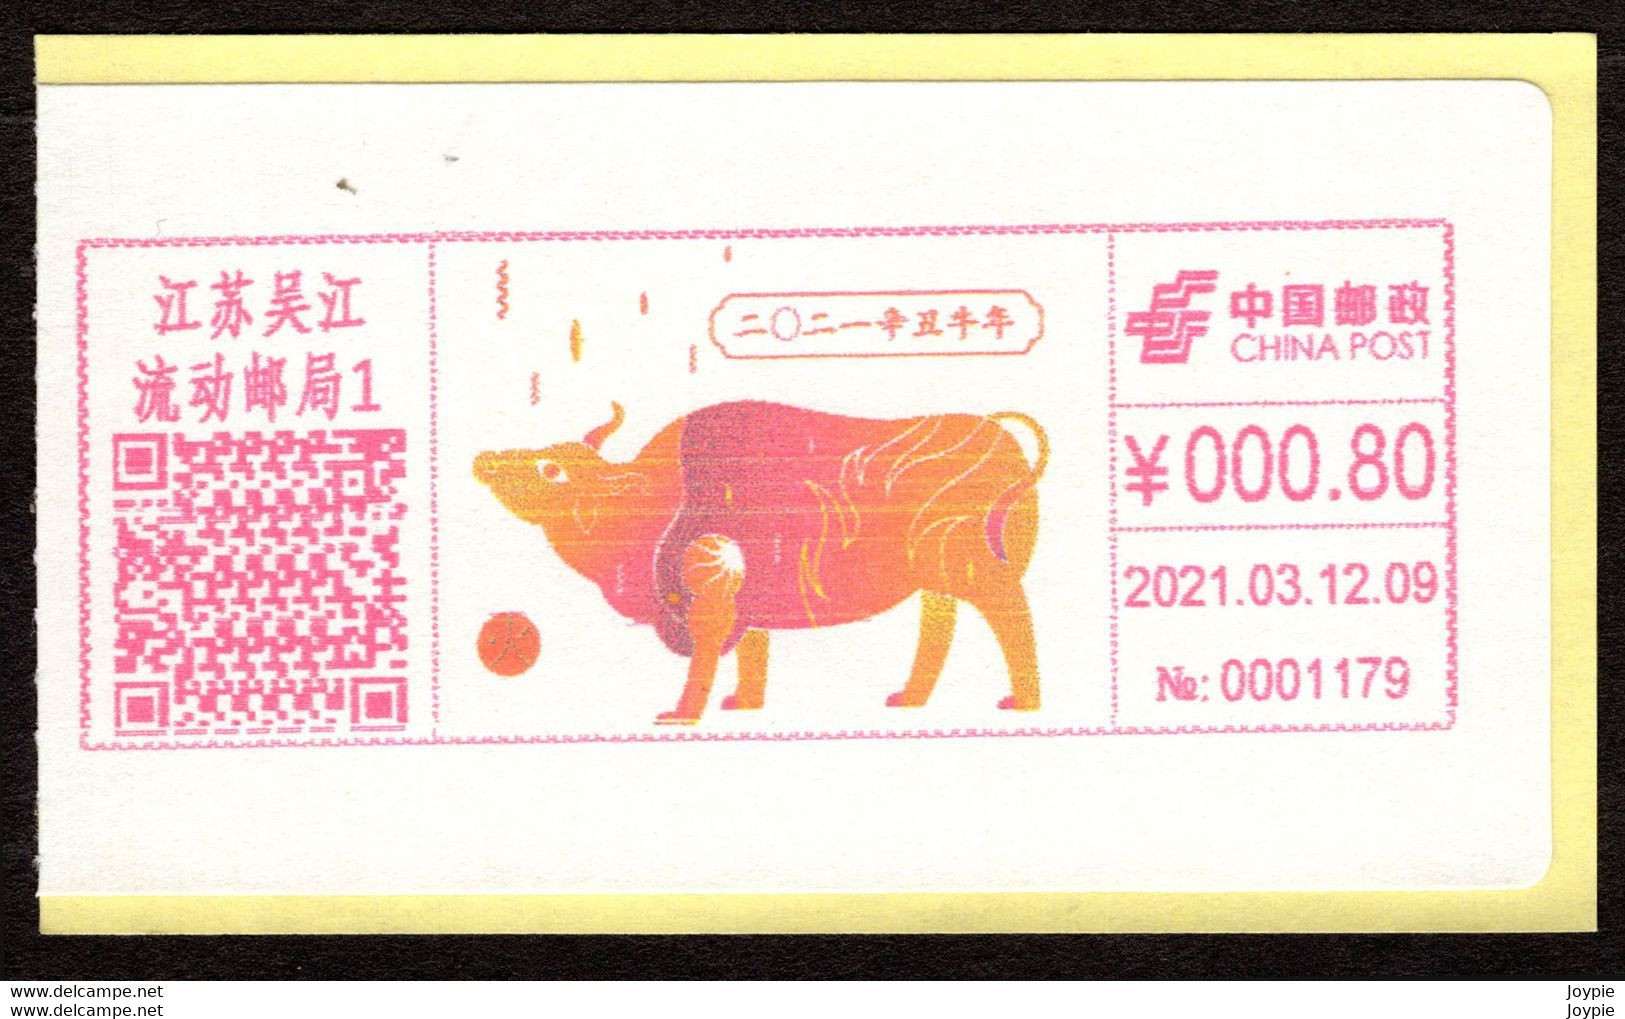 China WuJiang 2021 "Fire Of "The Five Phases" And Cow" Digital Anti-counterfeiting Type Color Postage Meter - Lettres & Documents